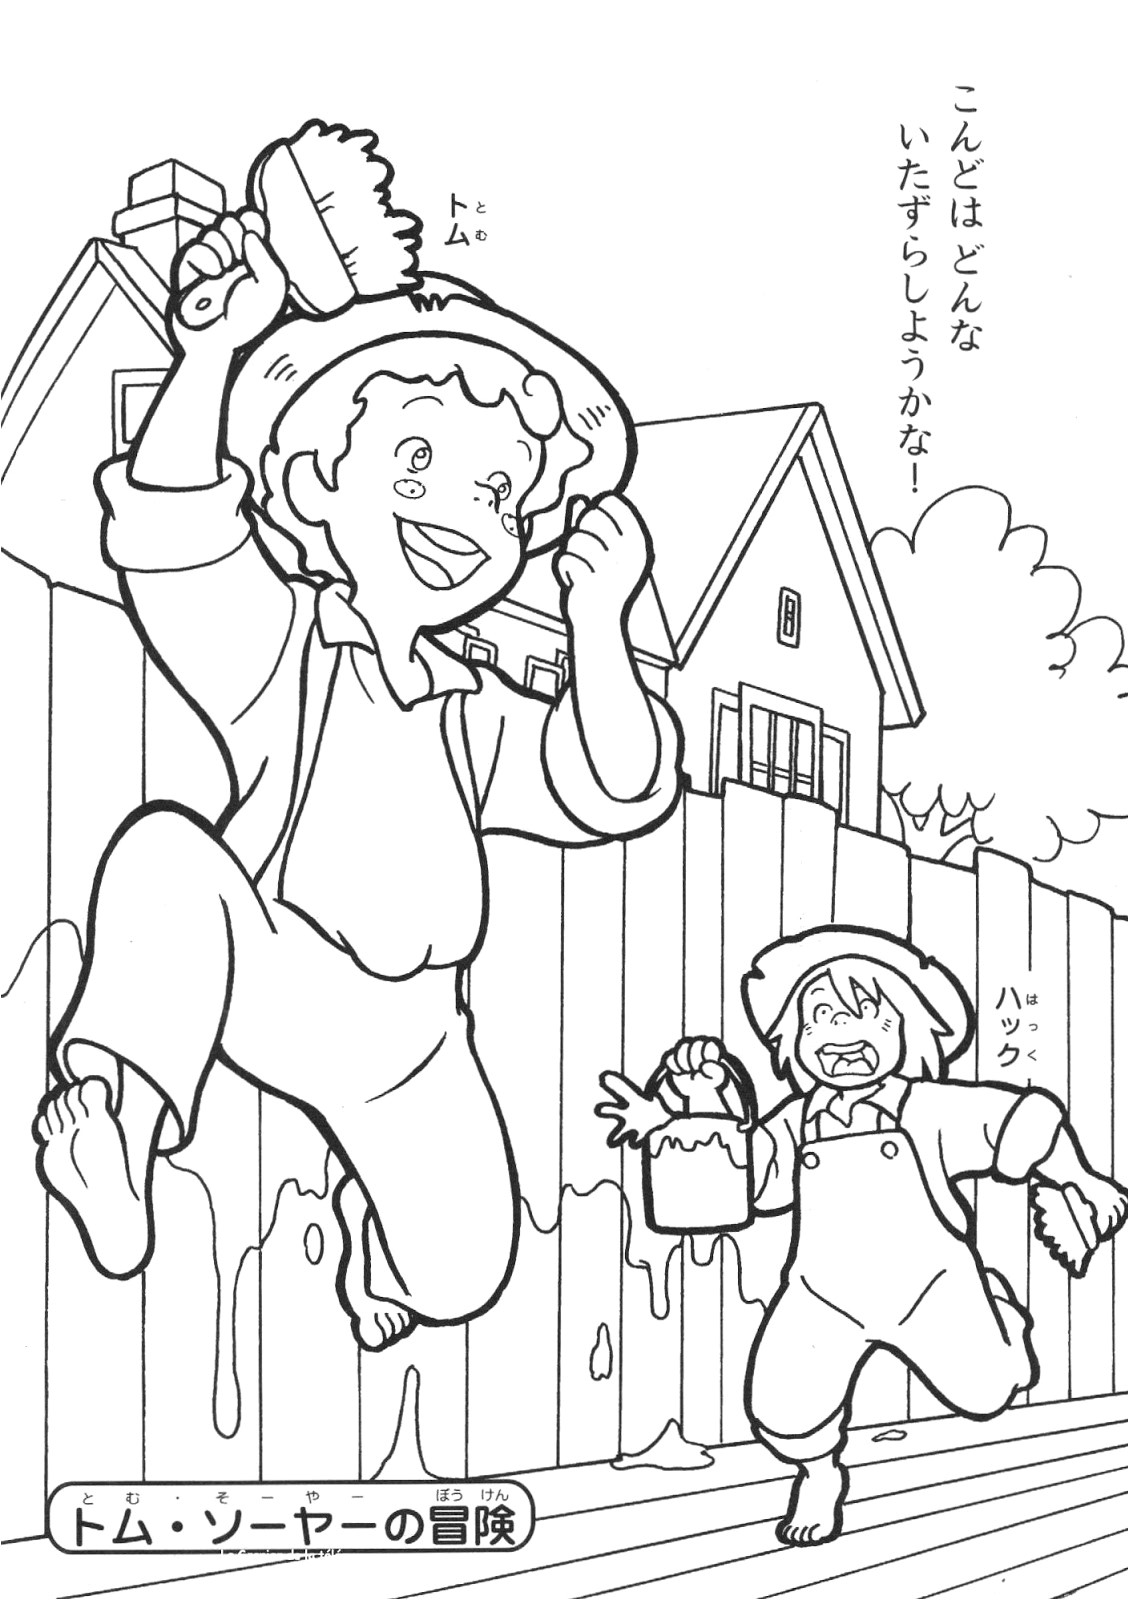 Tom Sawyer Coloring Pages